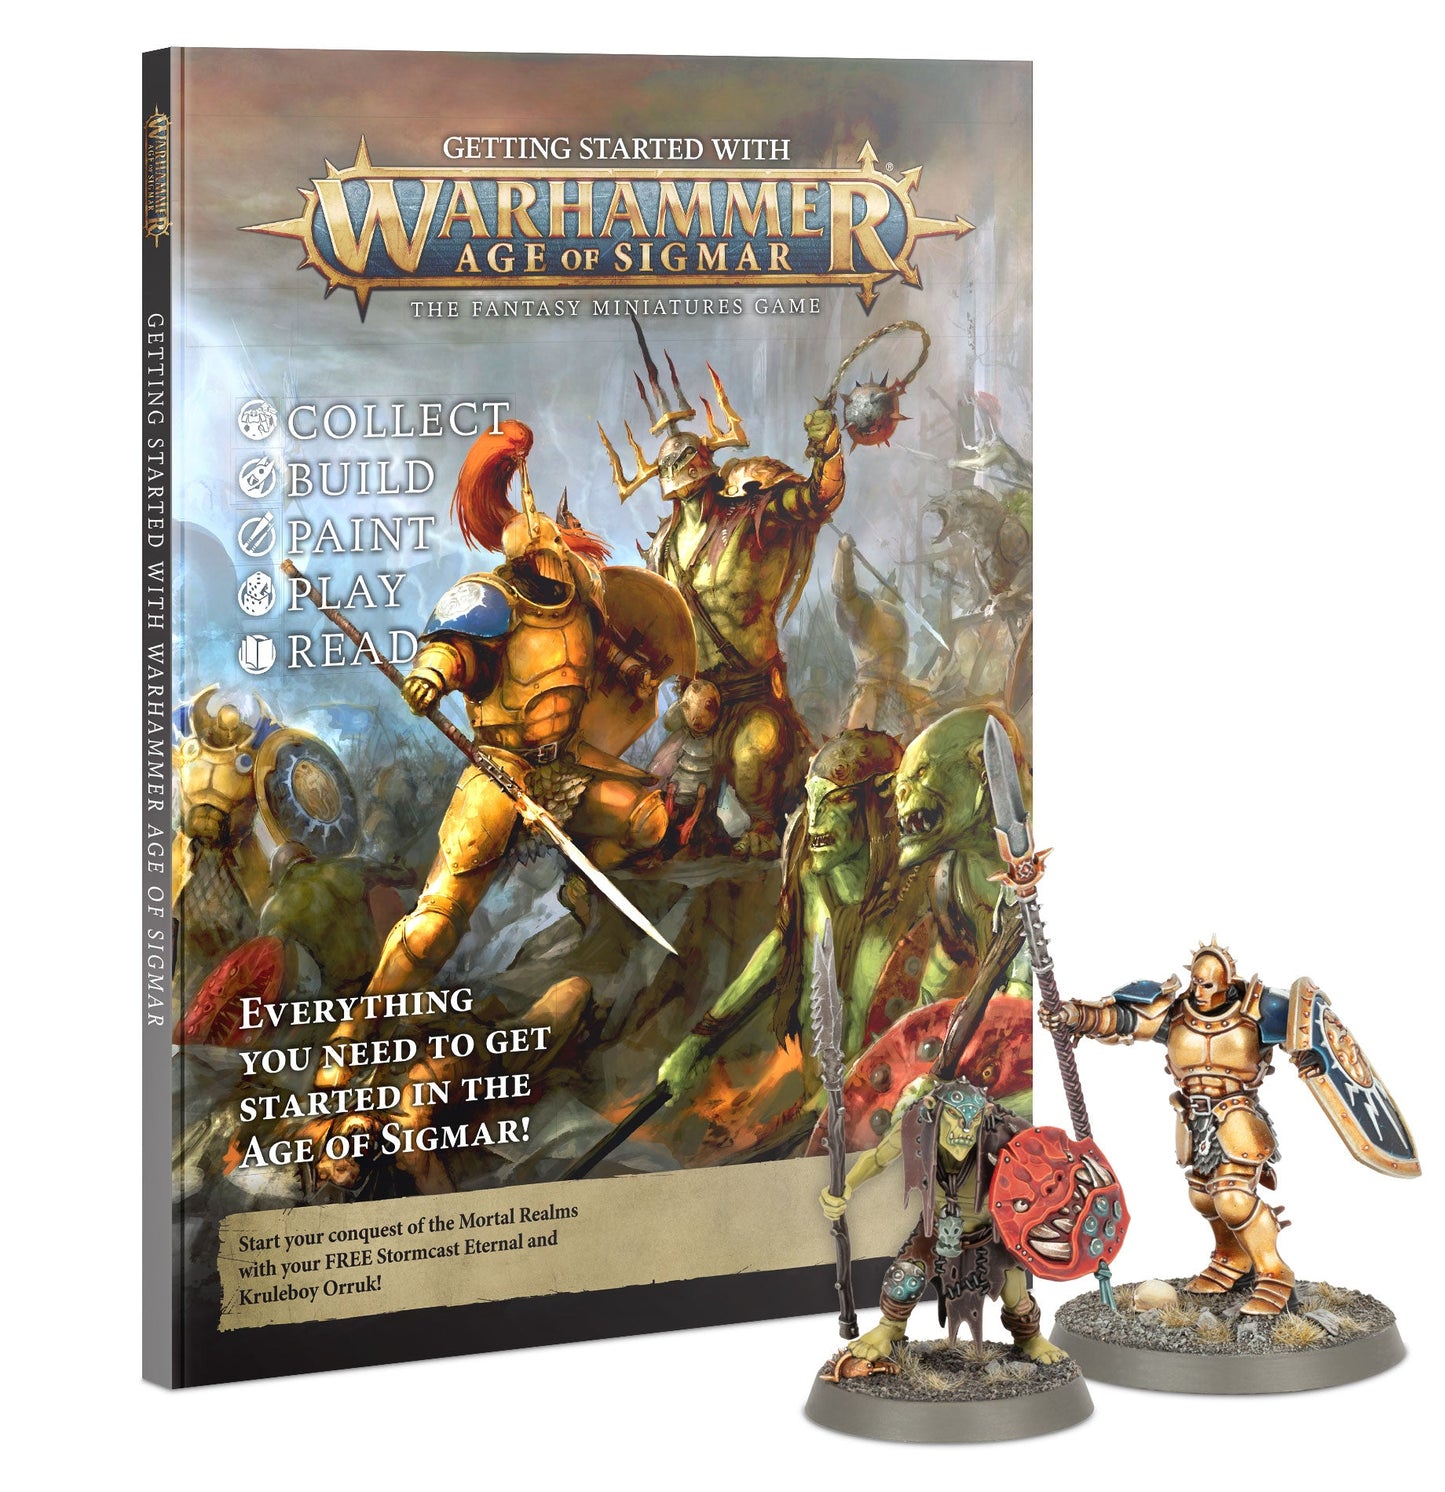 Getting Started With Warhammer Age of Sigmar - Gamescape